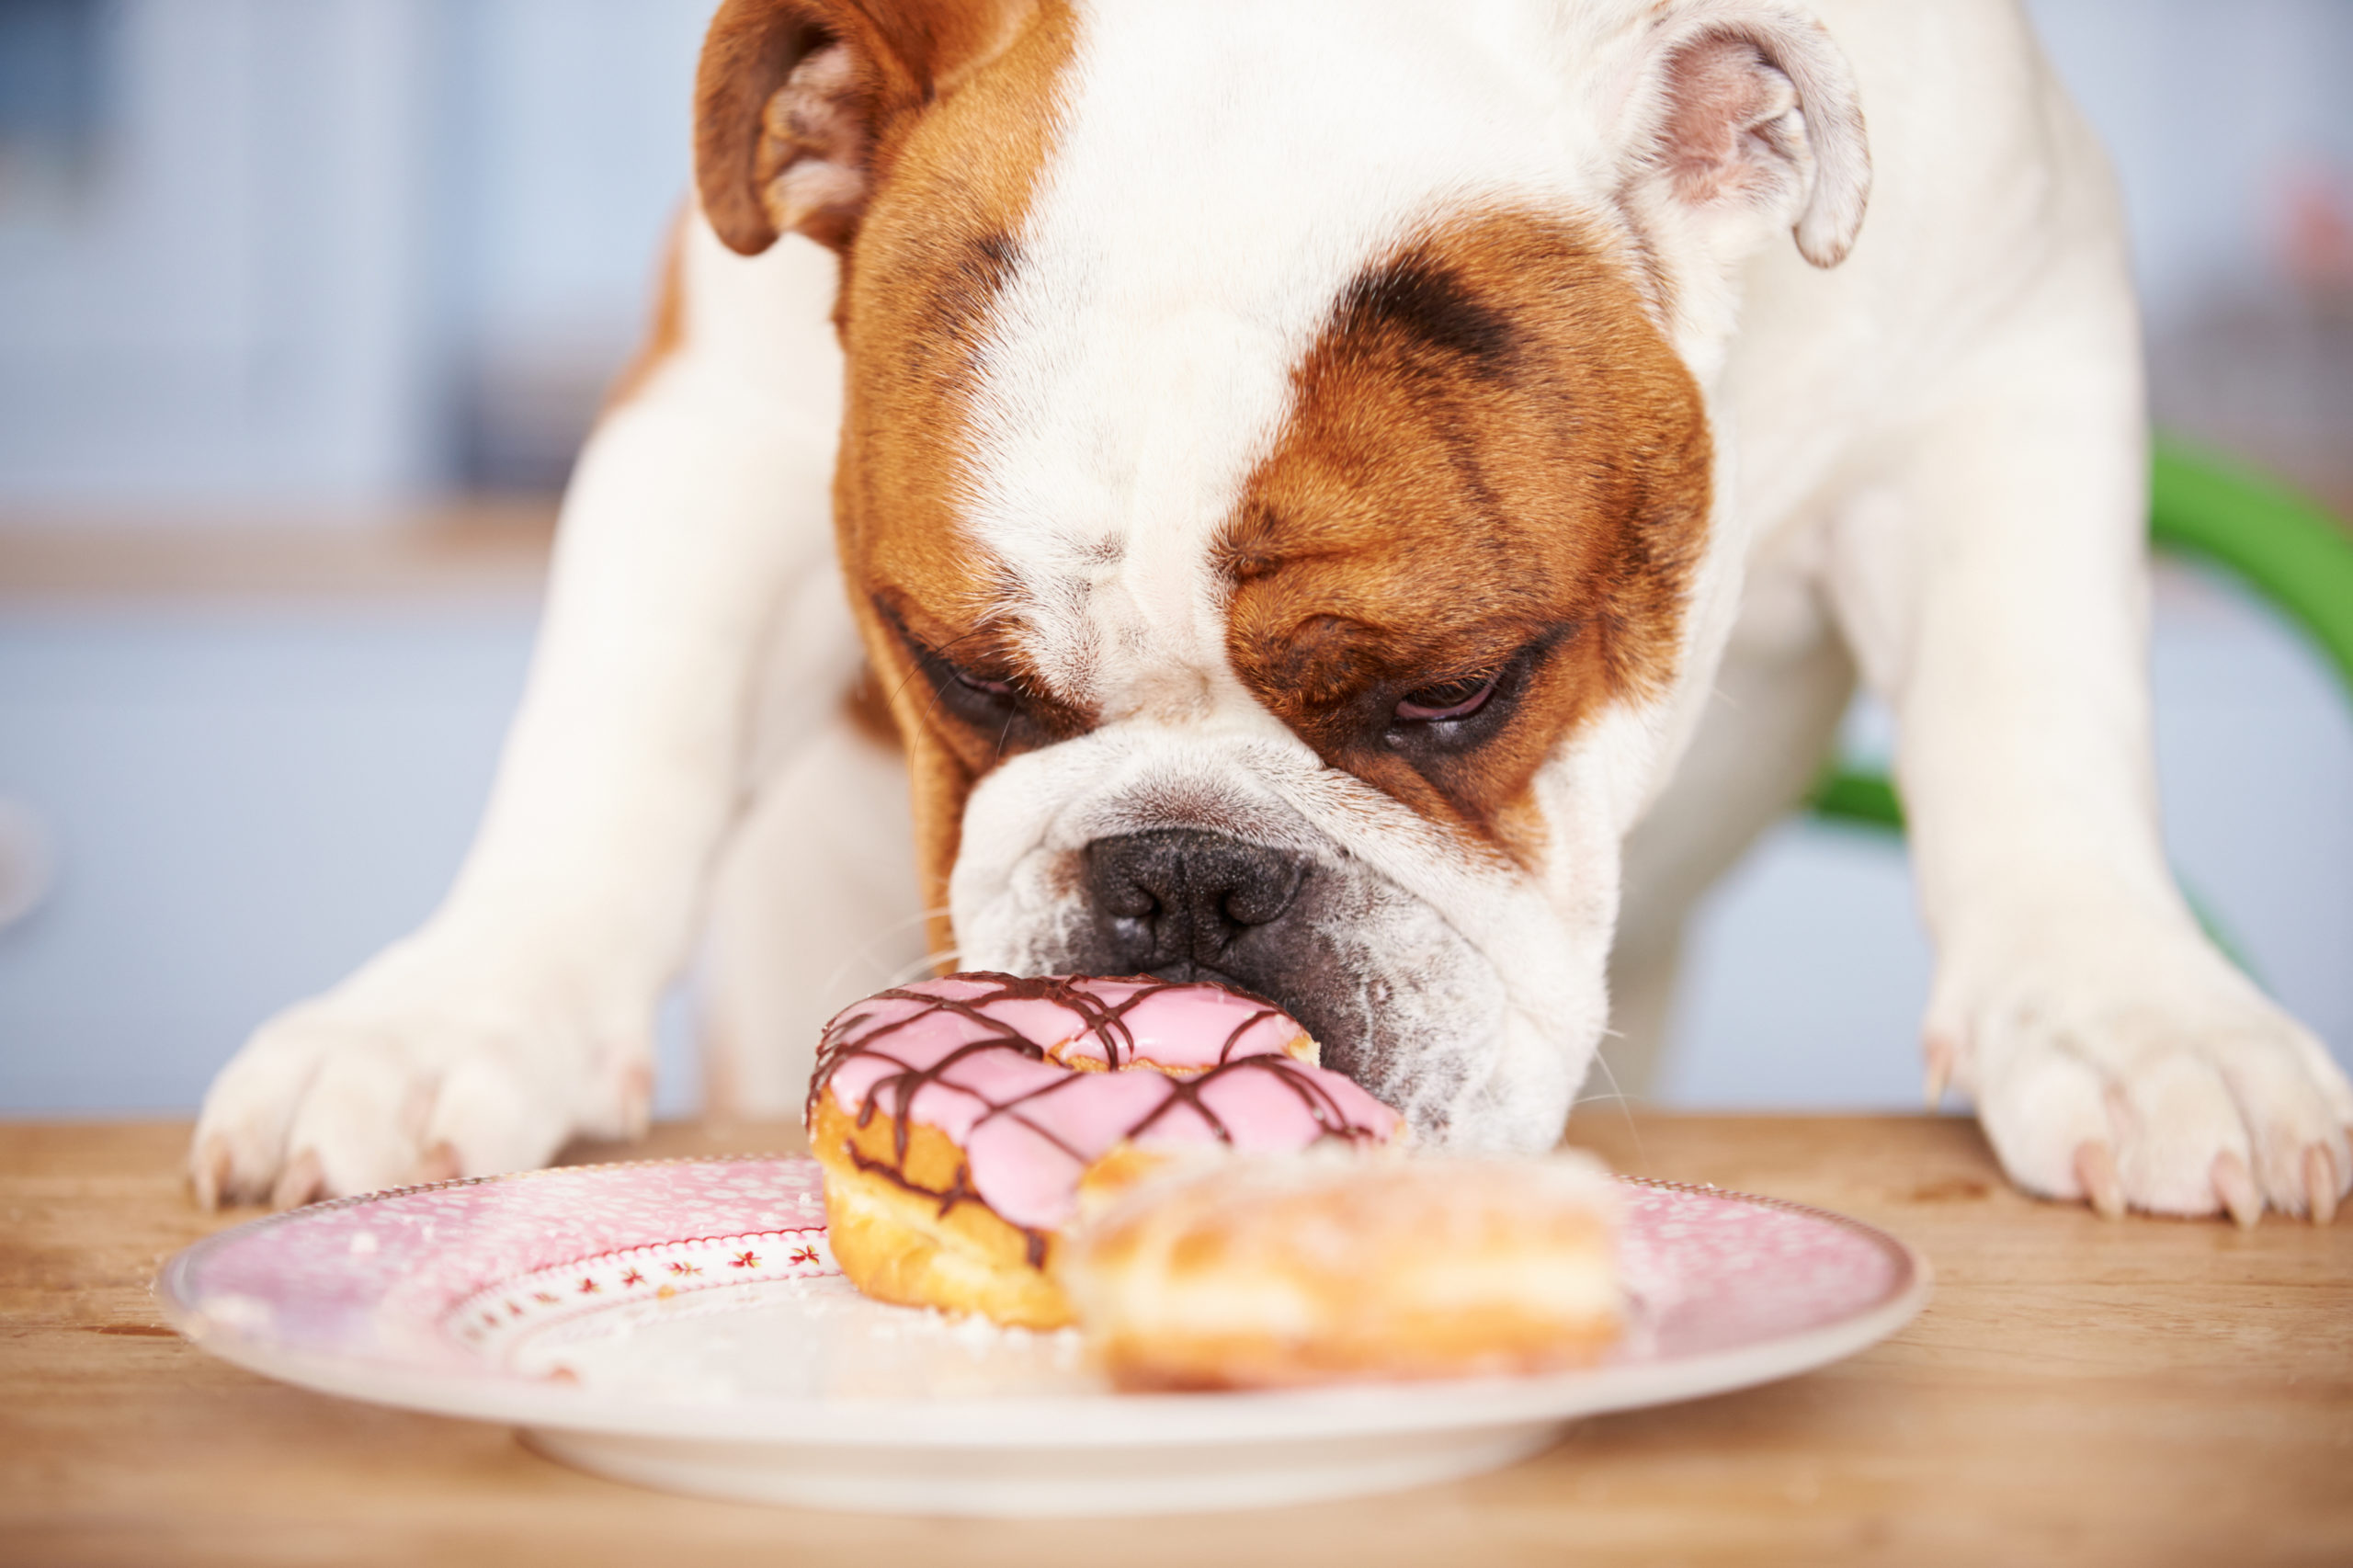 Sad Looking British Bulldog Tempted By Plate Of Cakes